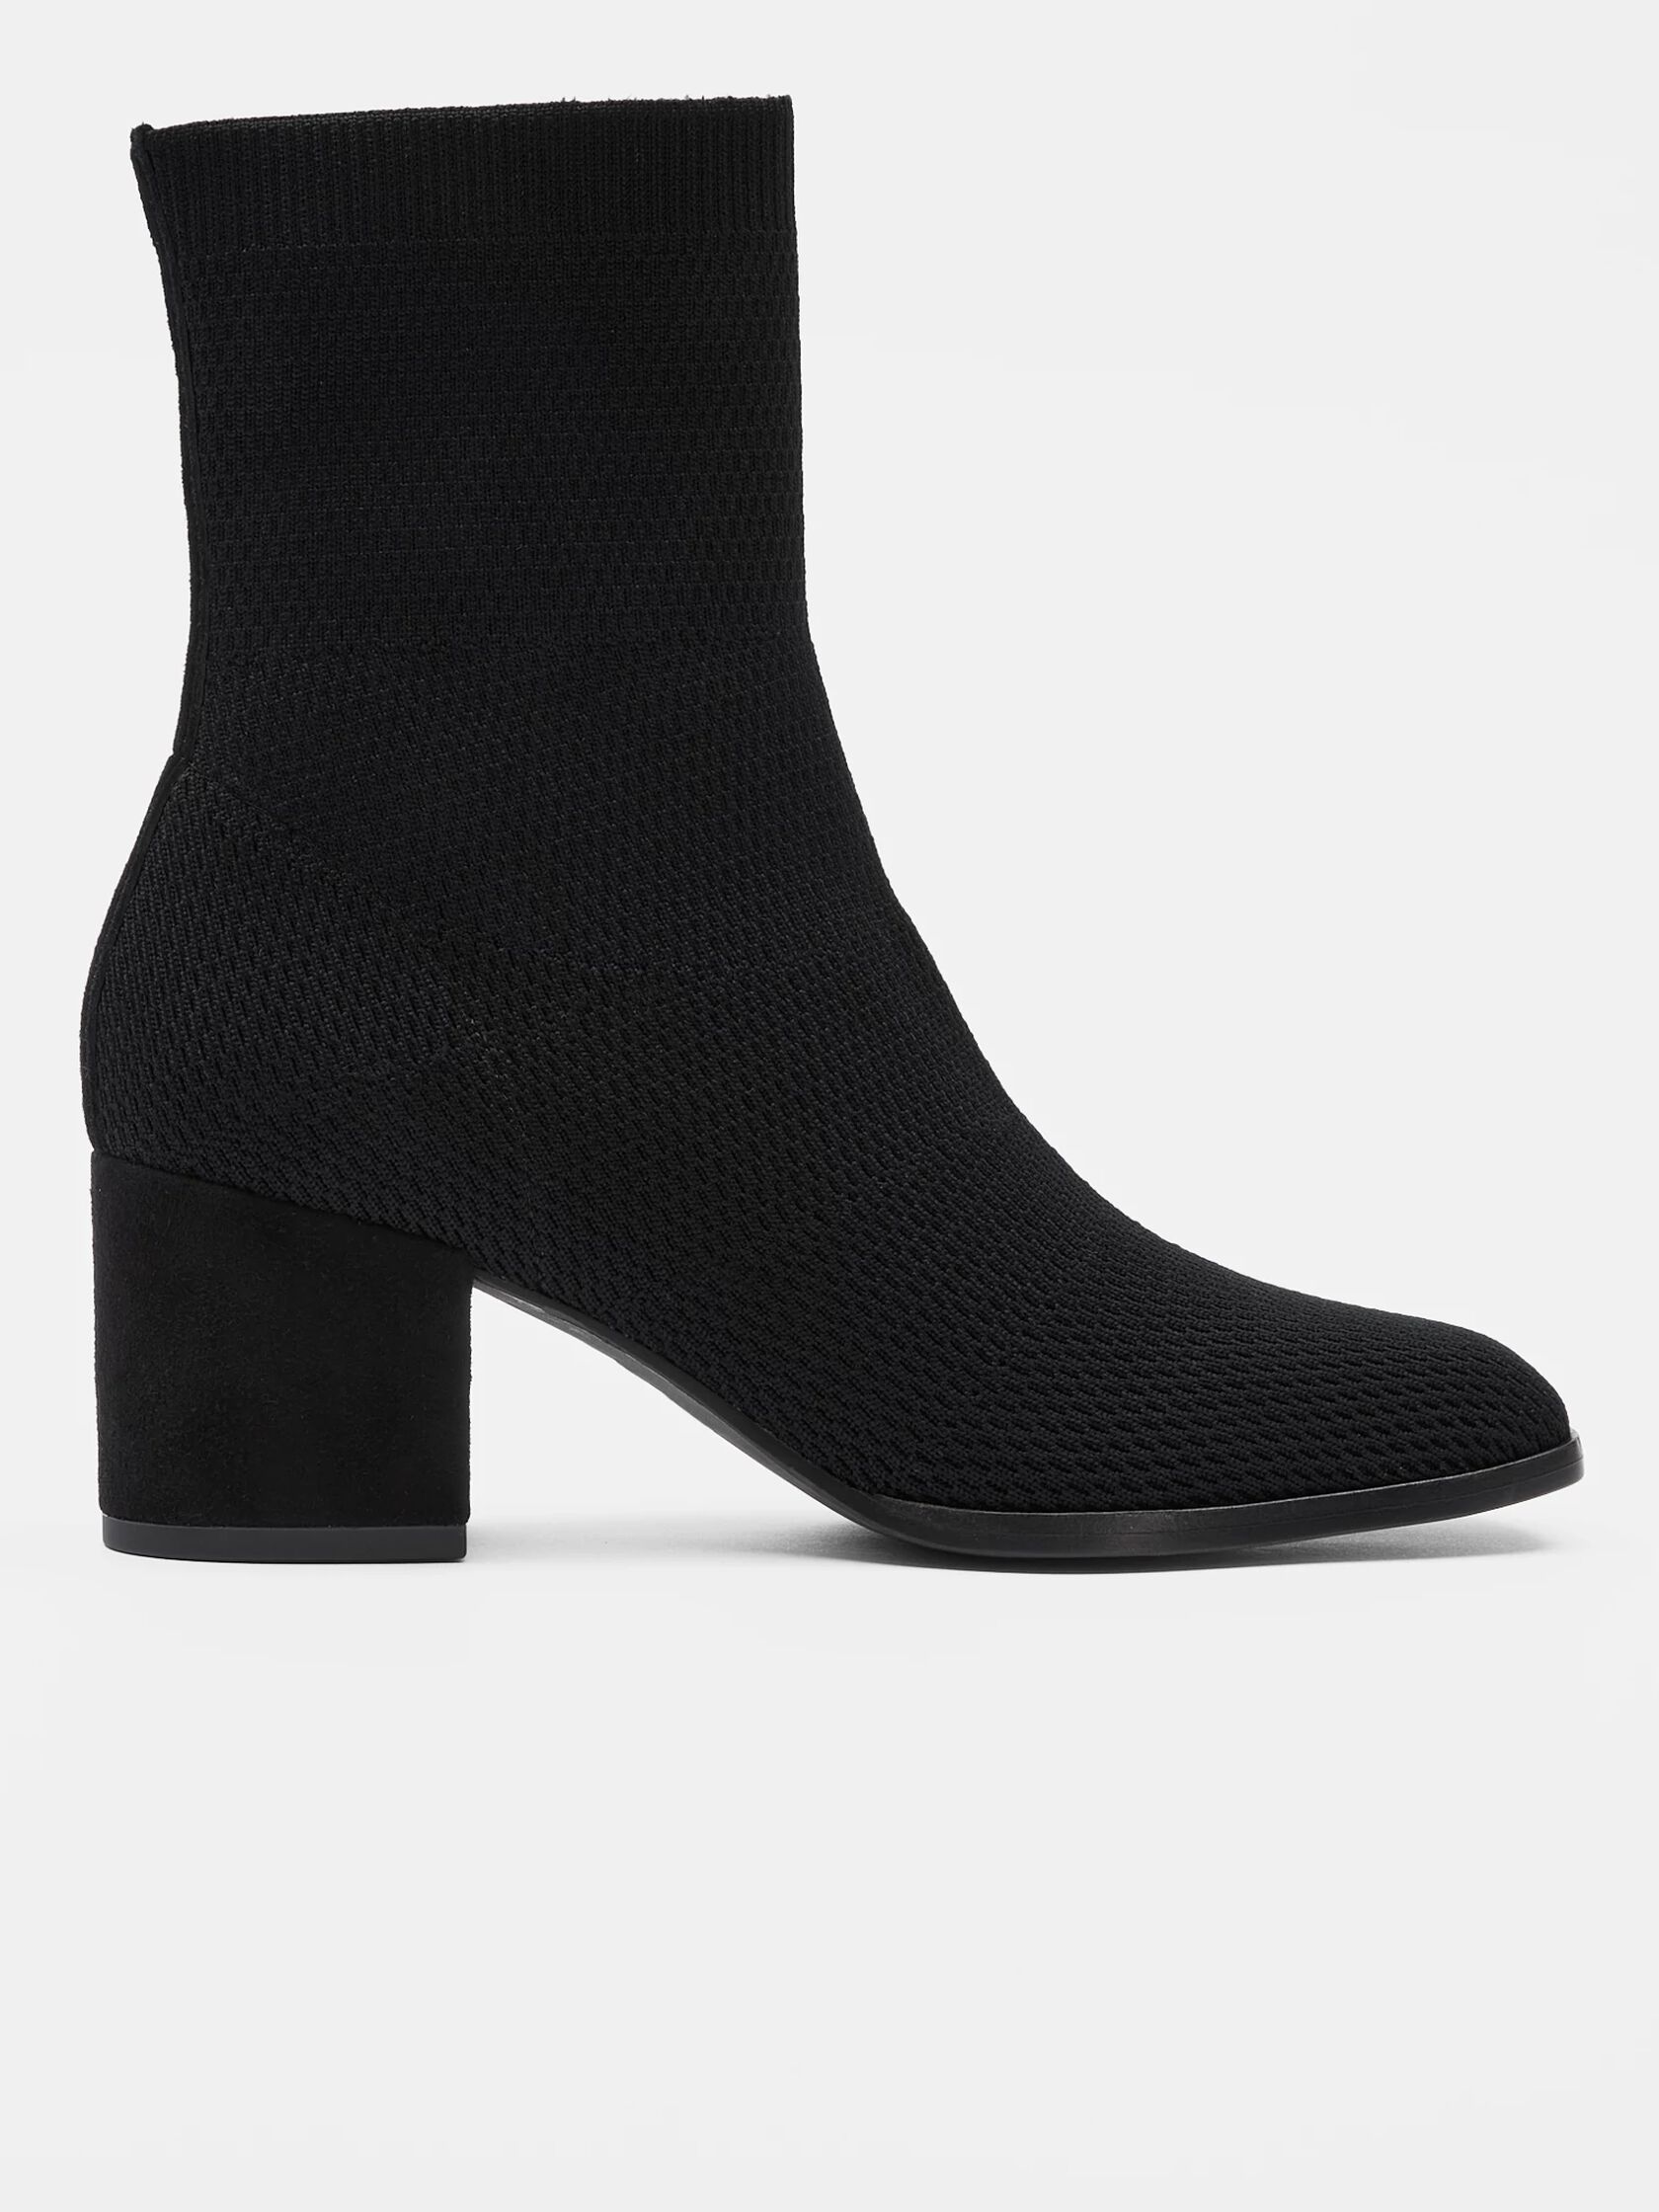 Ohm Recycled Stretch Knit Boot